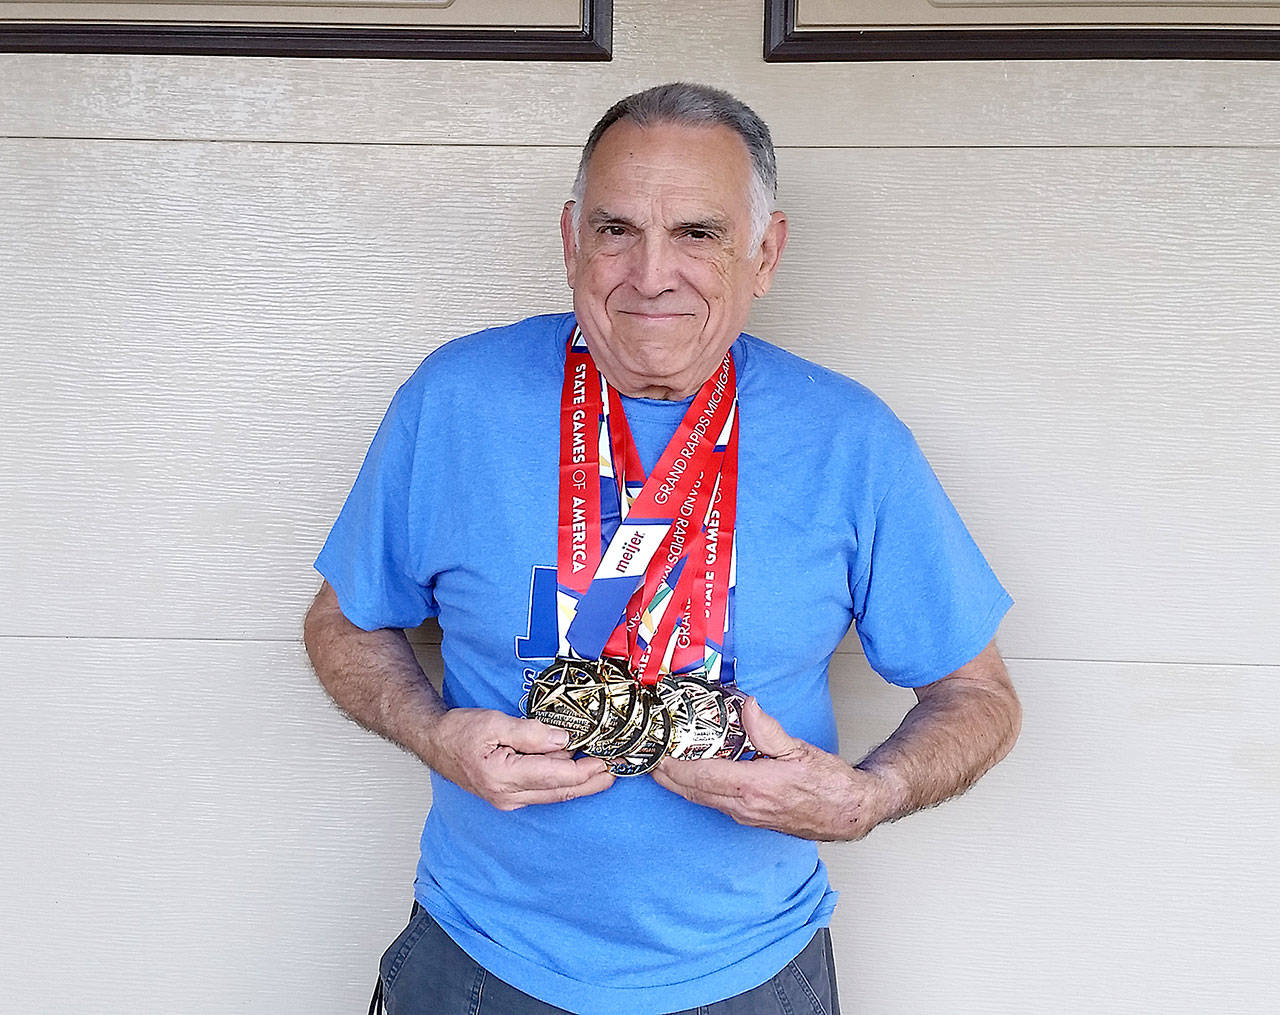 Ron Snipe, a retired schoolteacher from Port Angeles, last month won six gold medals in swimming at the State Games of America.